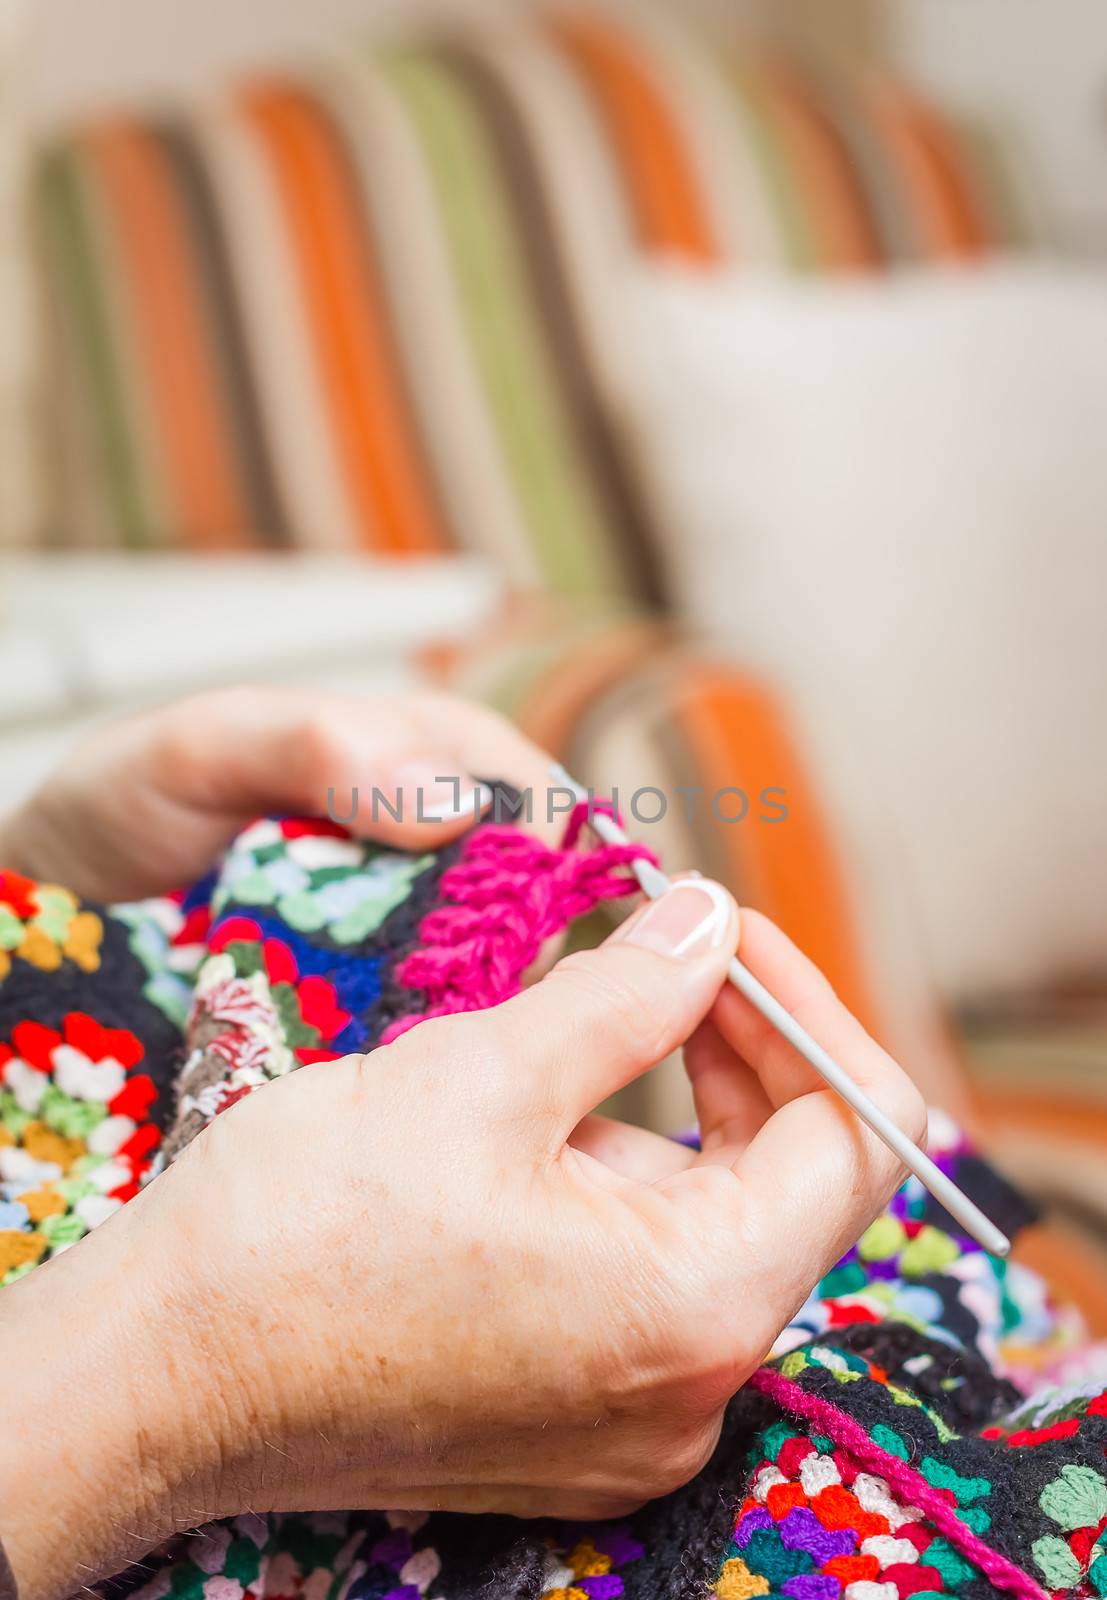 Hands of senior woman knitting a vintage wool quilt with colorful patches. Selective focus over hand in the foreground.